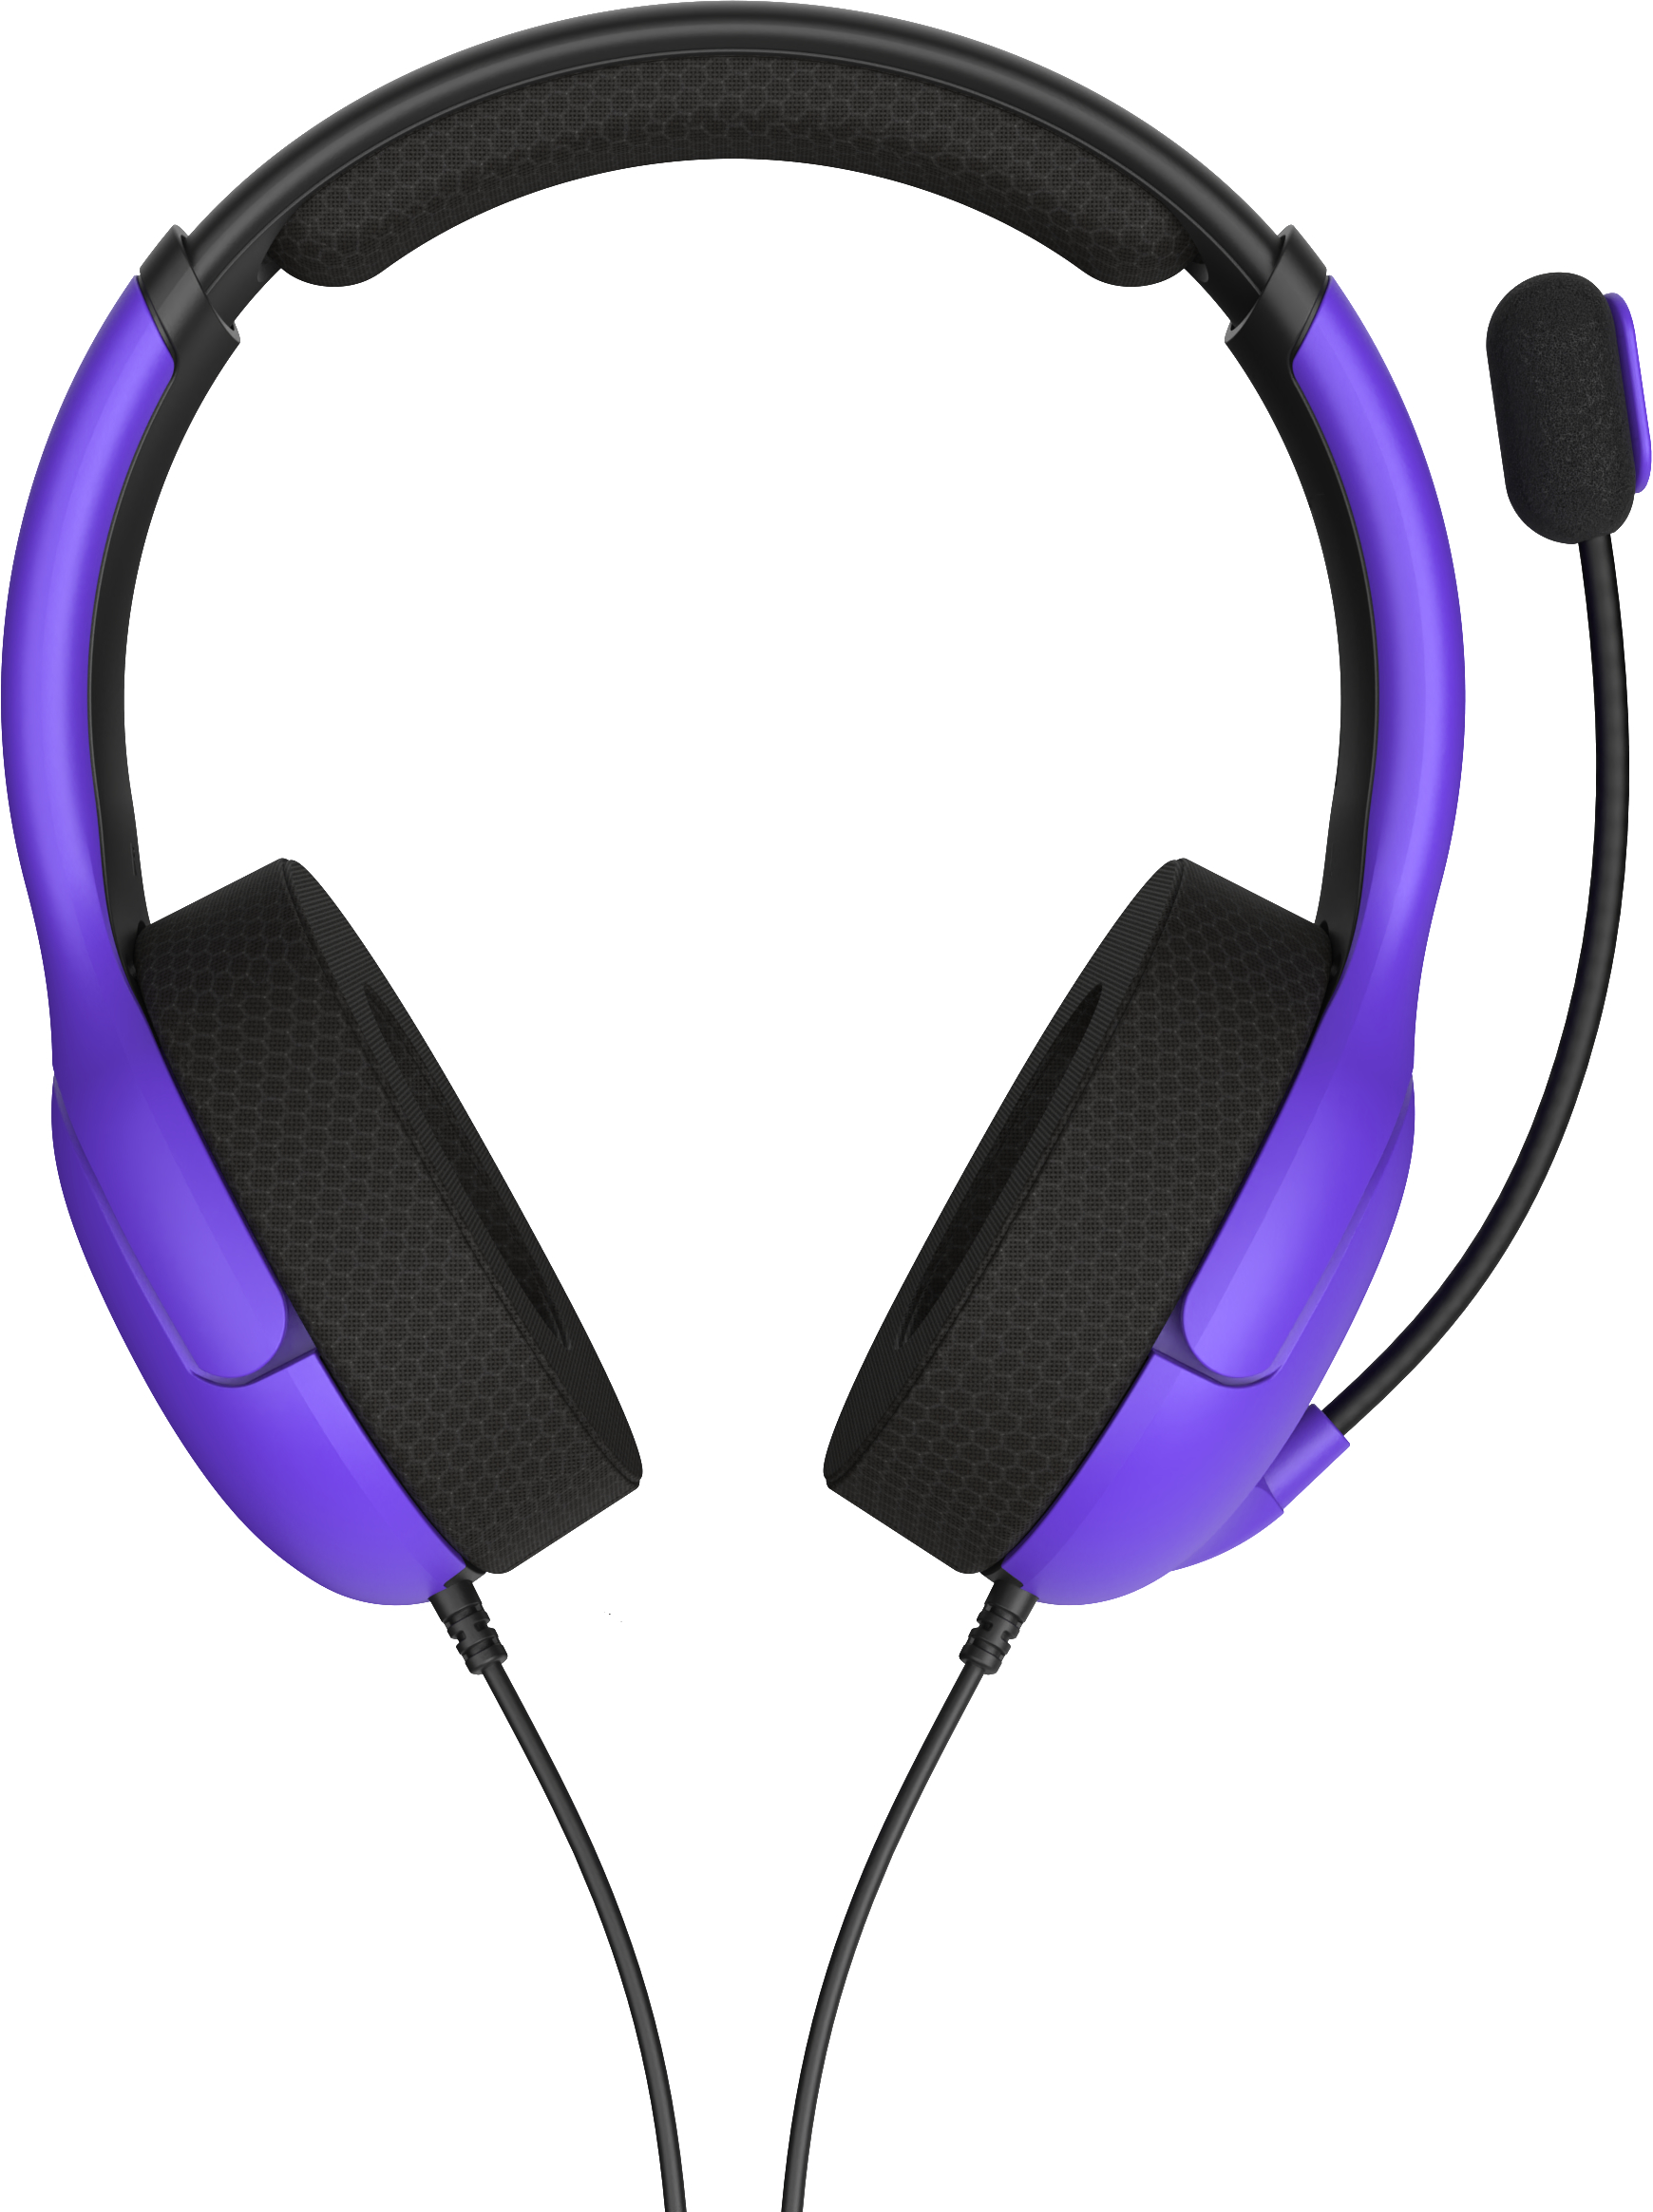 PDP Airlite Wired Stereo Headset 052-011-ULVI PS5, Ultra Violet PS5, Ultra Violet